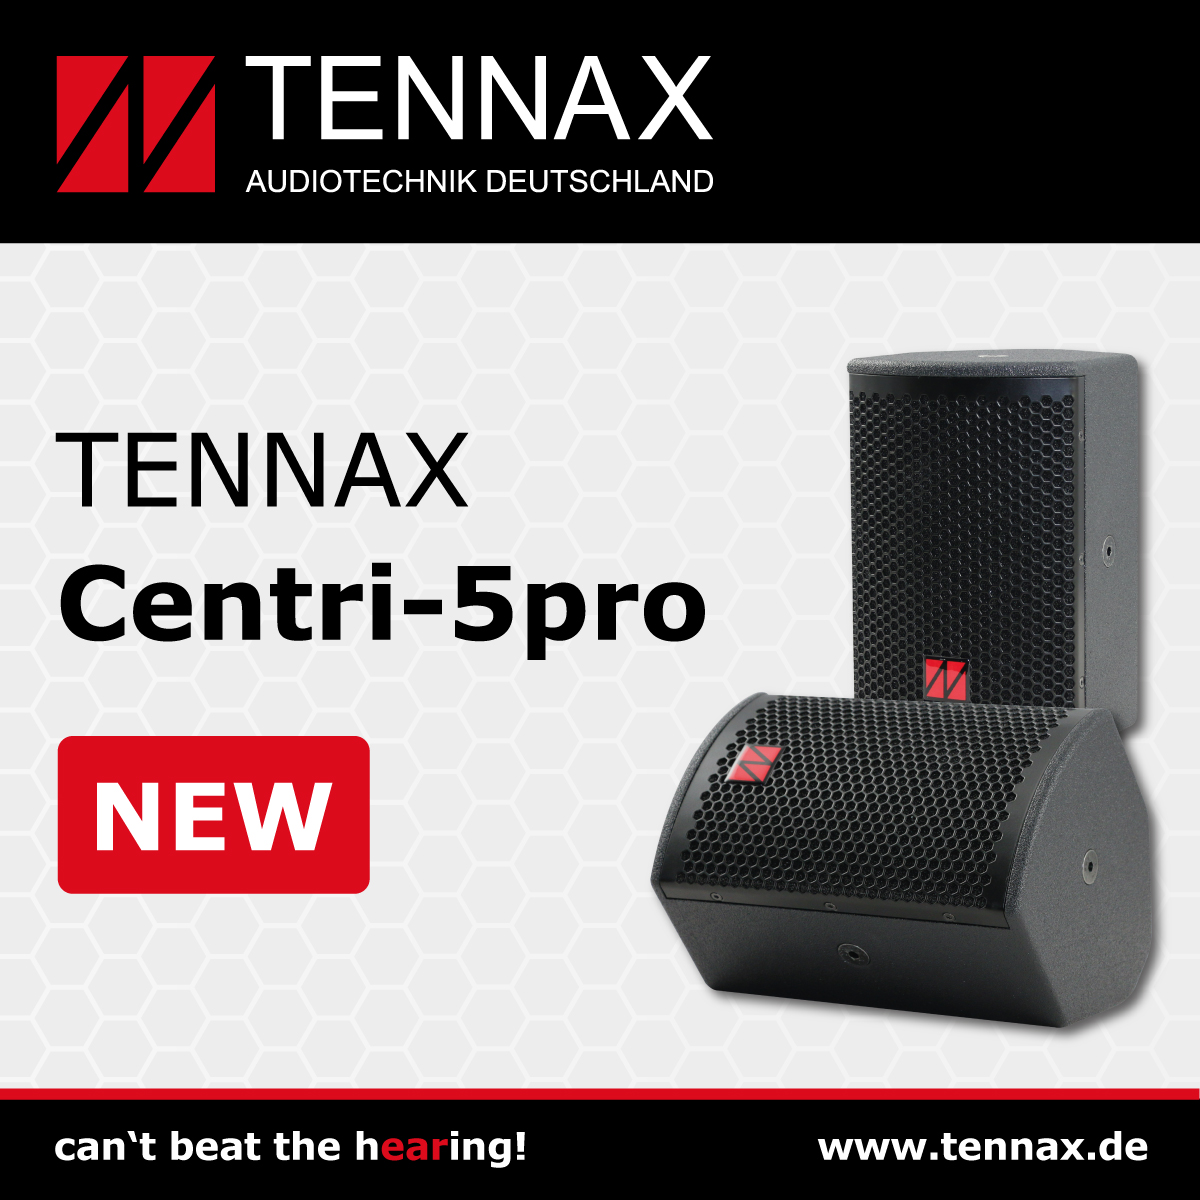 TENNAX enlarges product range with Centri-5pro